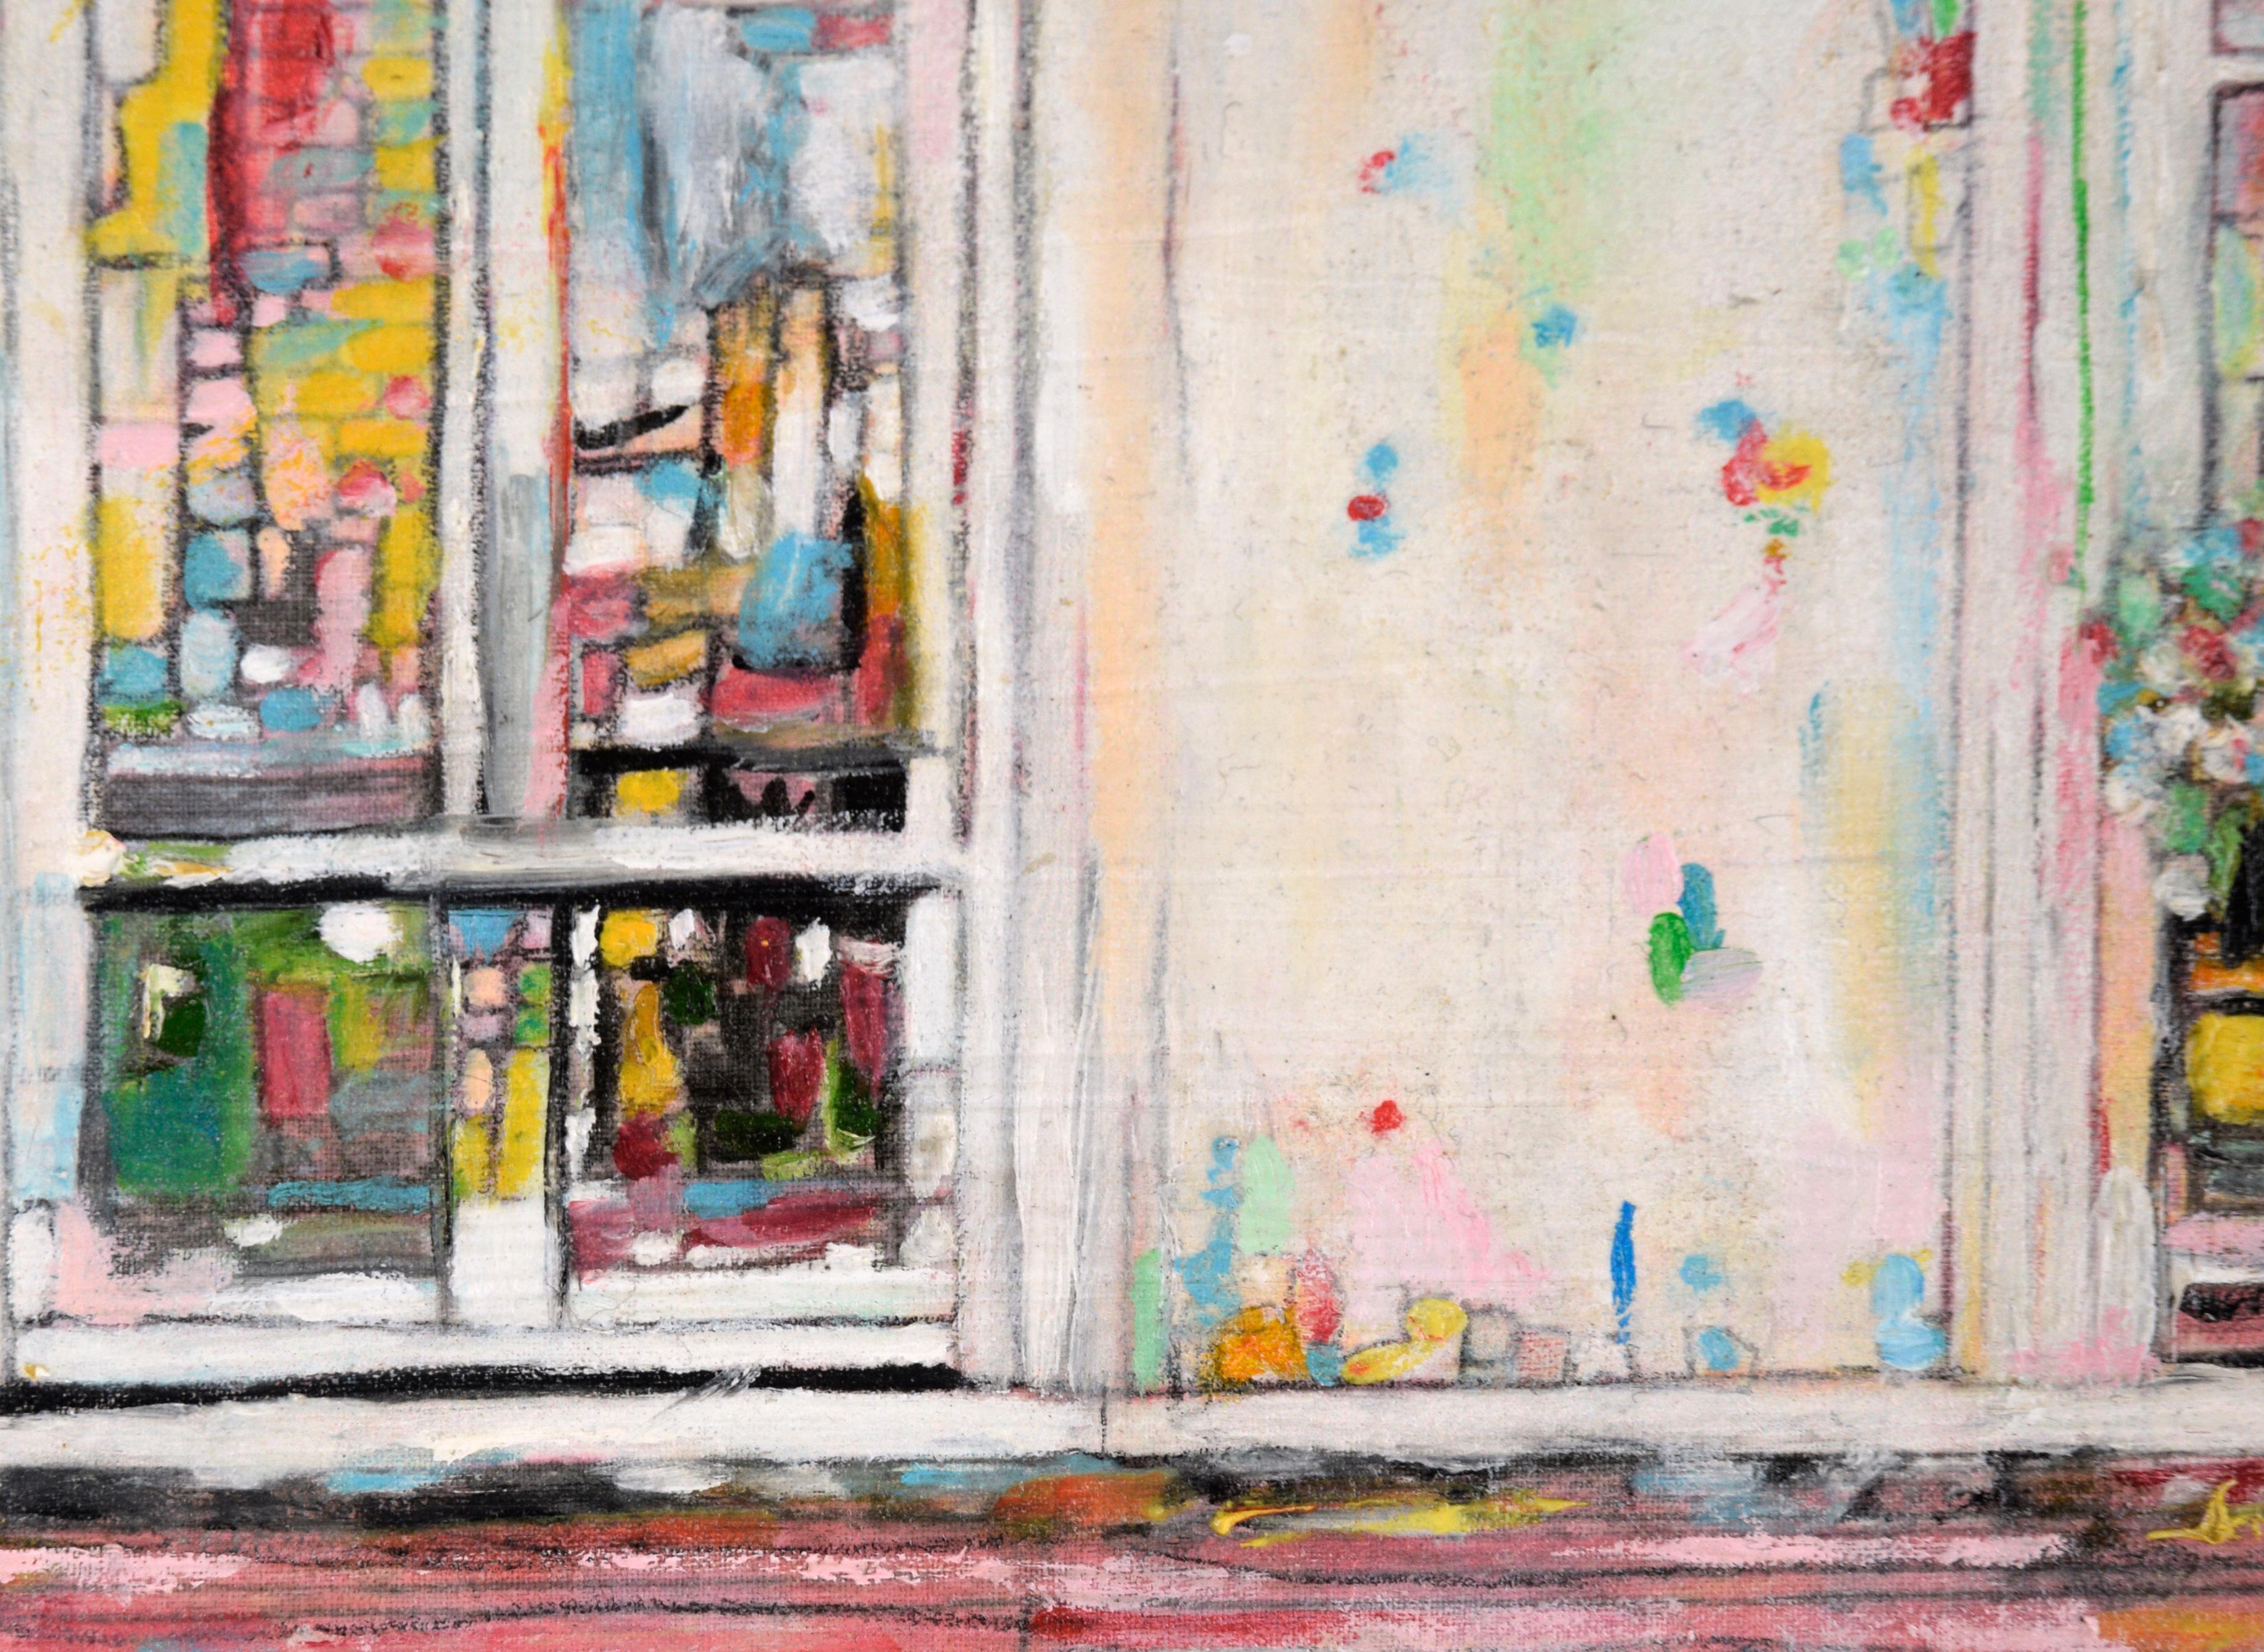 Vibrant depiction of windows by Ana Doolin (Portuguese, b. 1961). Signed 